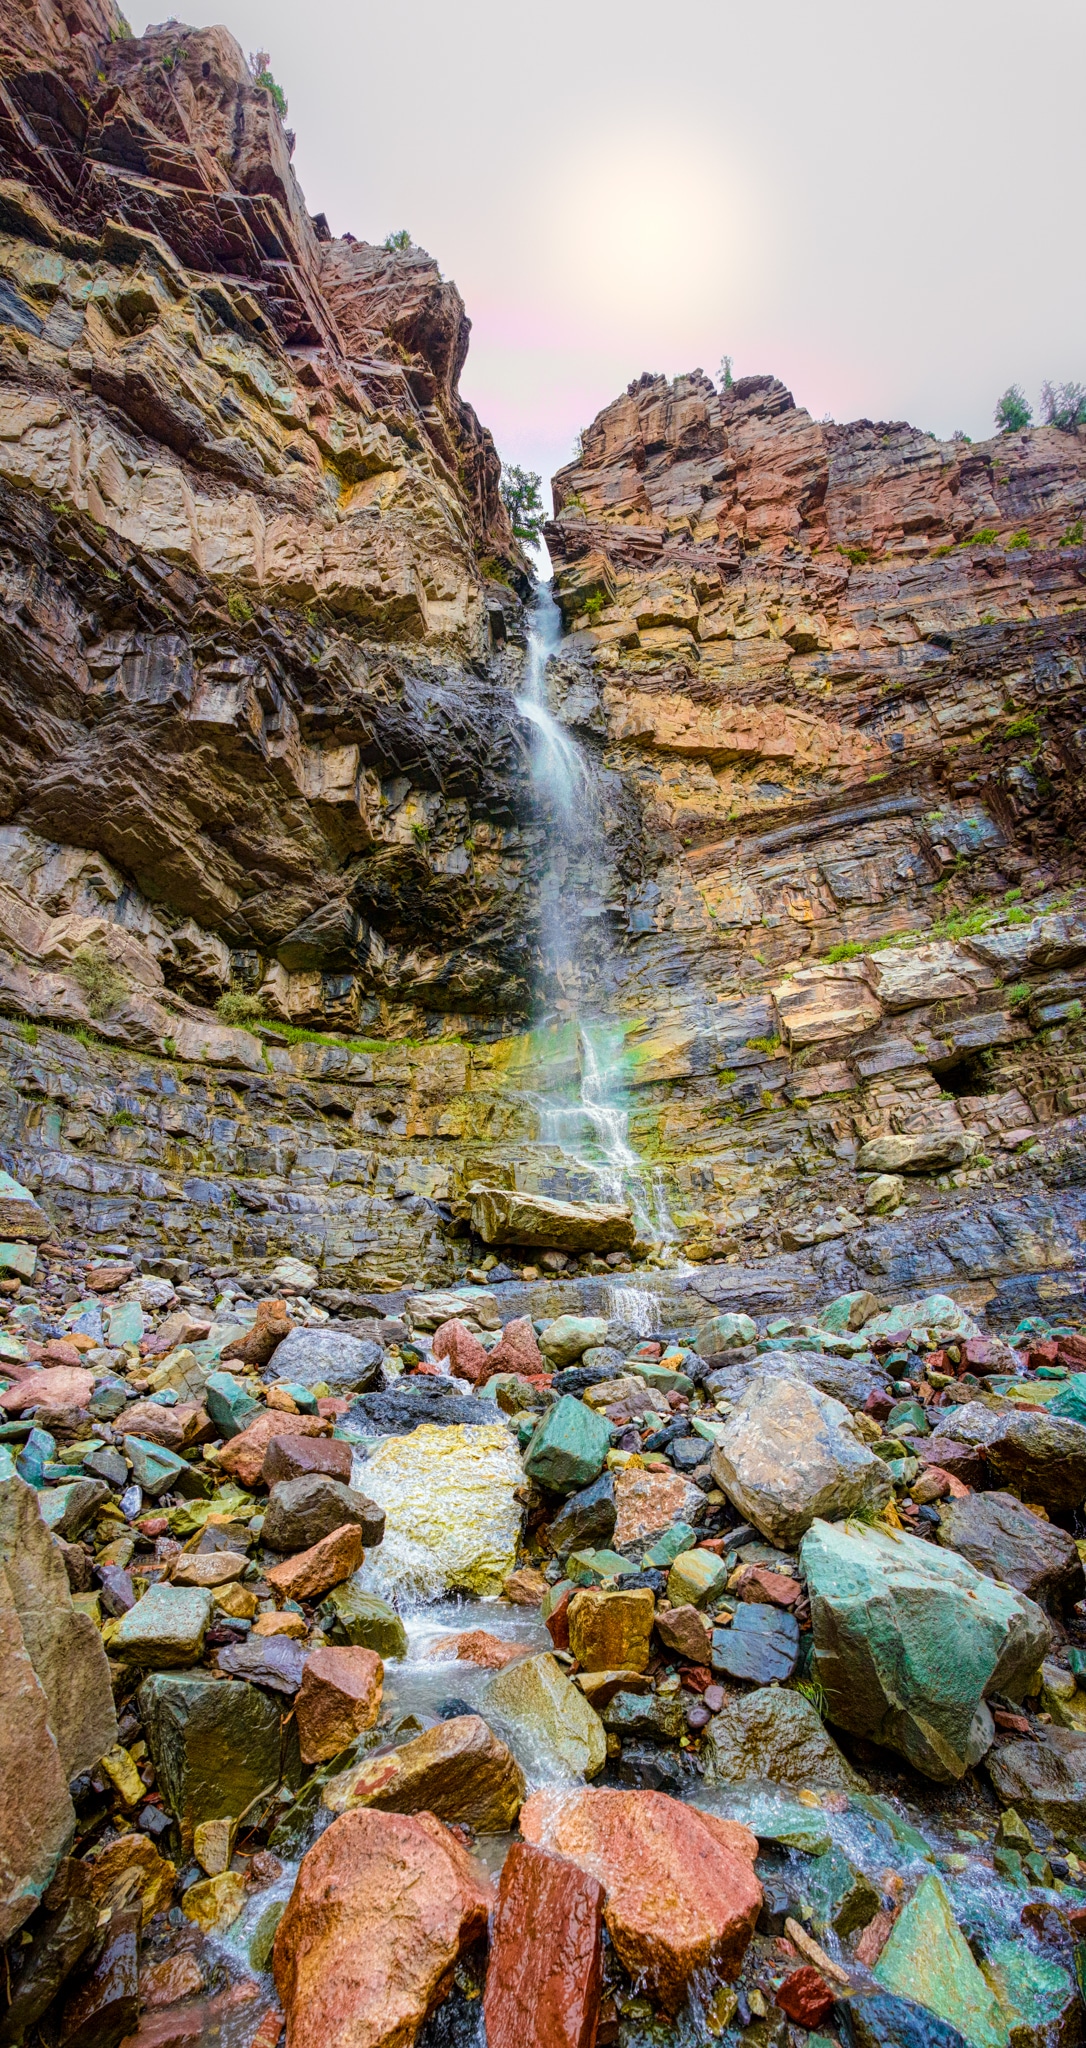 Cascade Falls in Ouray, Colorado, is roughly 160 feet high. Its volume varies with the seasons. Spring brings the highest volume of water, but monsoon rains cause an increase in the flow during the late summer months. The waterfall is fed by Cascade Creek.